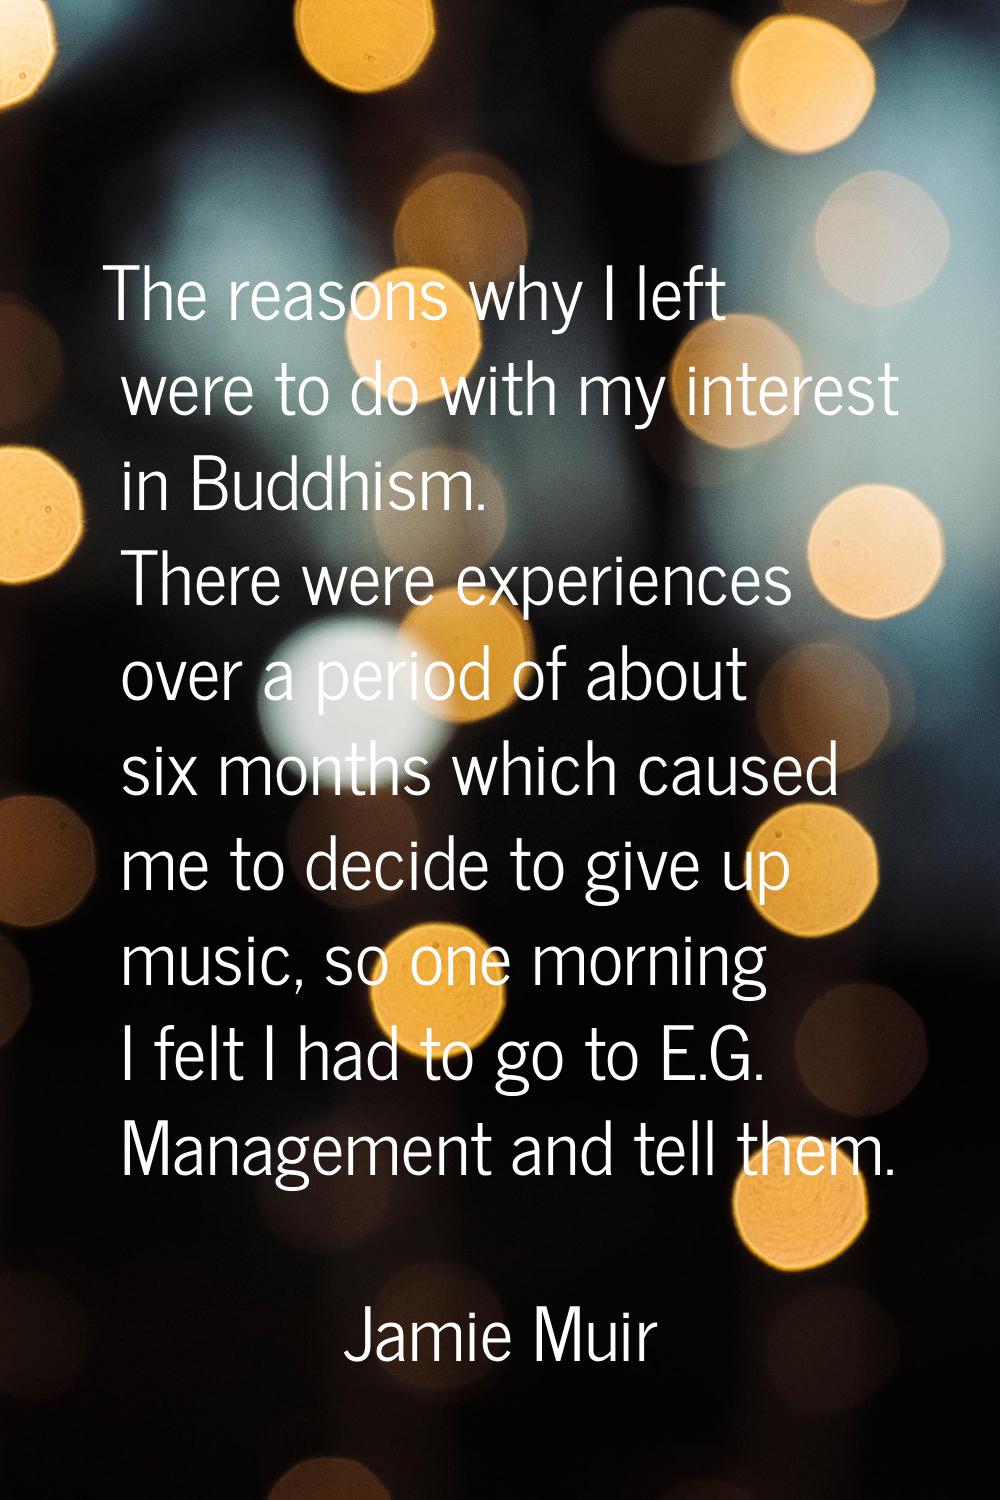 The reasons why I left were to do with my interest in Buddhism. There were experiences over a perio